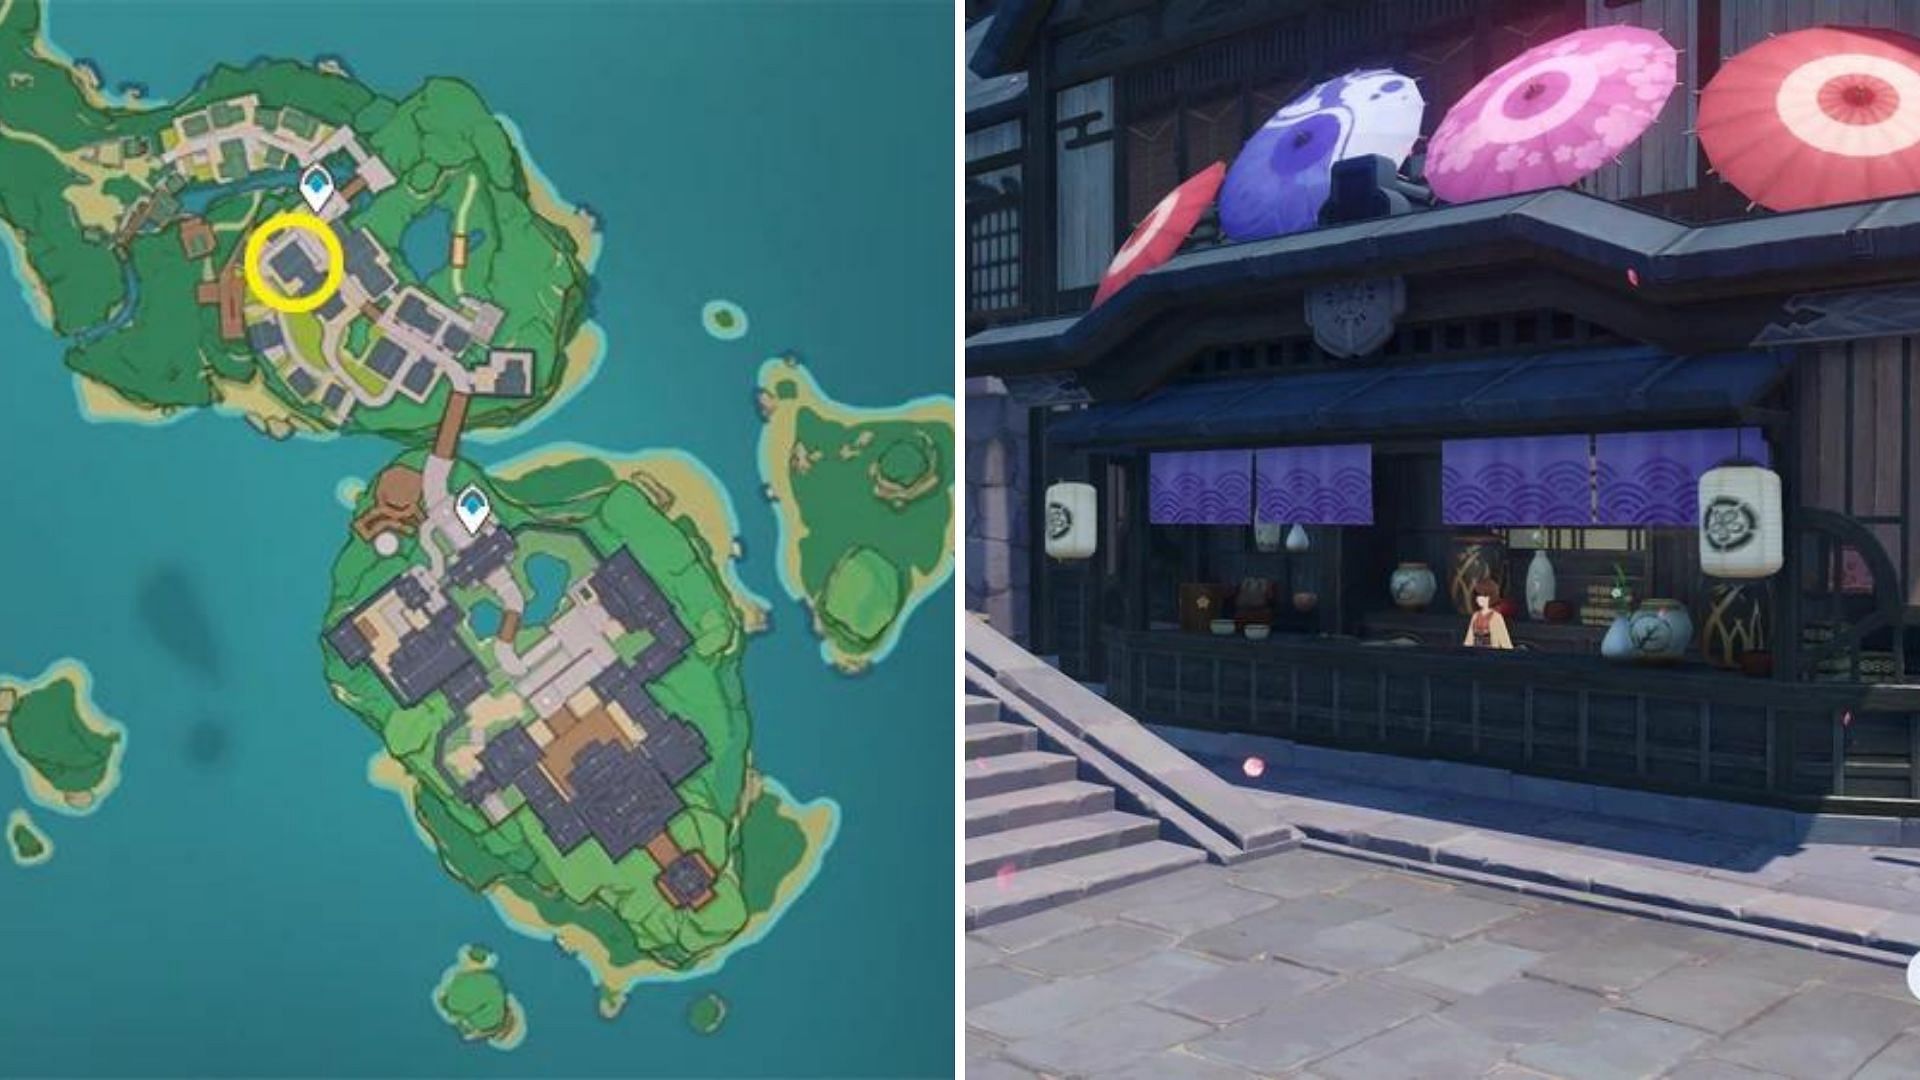 Players can buy pepper at this location in Inazuma (Image via Genshin Impact)